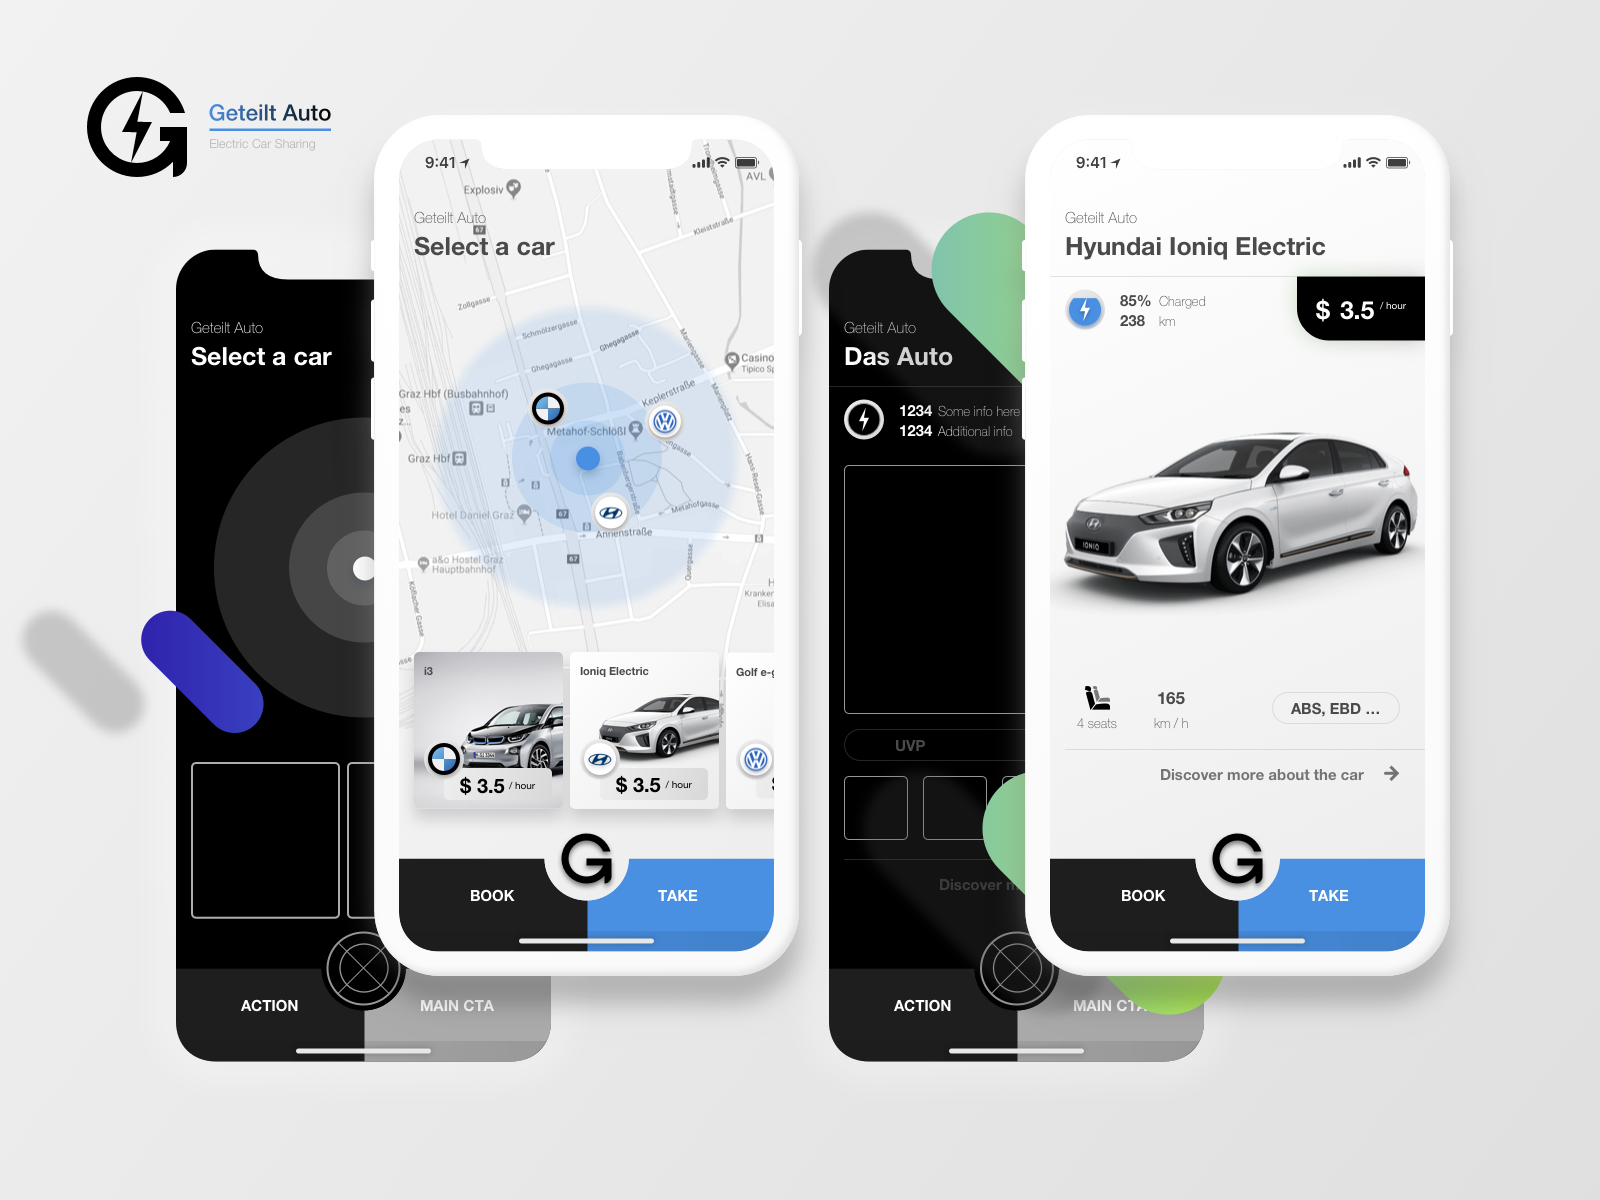 The search is one of the key features of any car rental application (*image by [Oleksandr Matorin](https://dribbble.com/Nekomata){ rel="nofollow" .default-md}*)